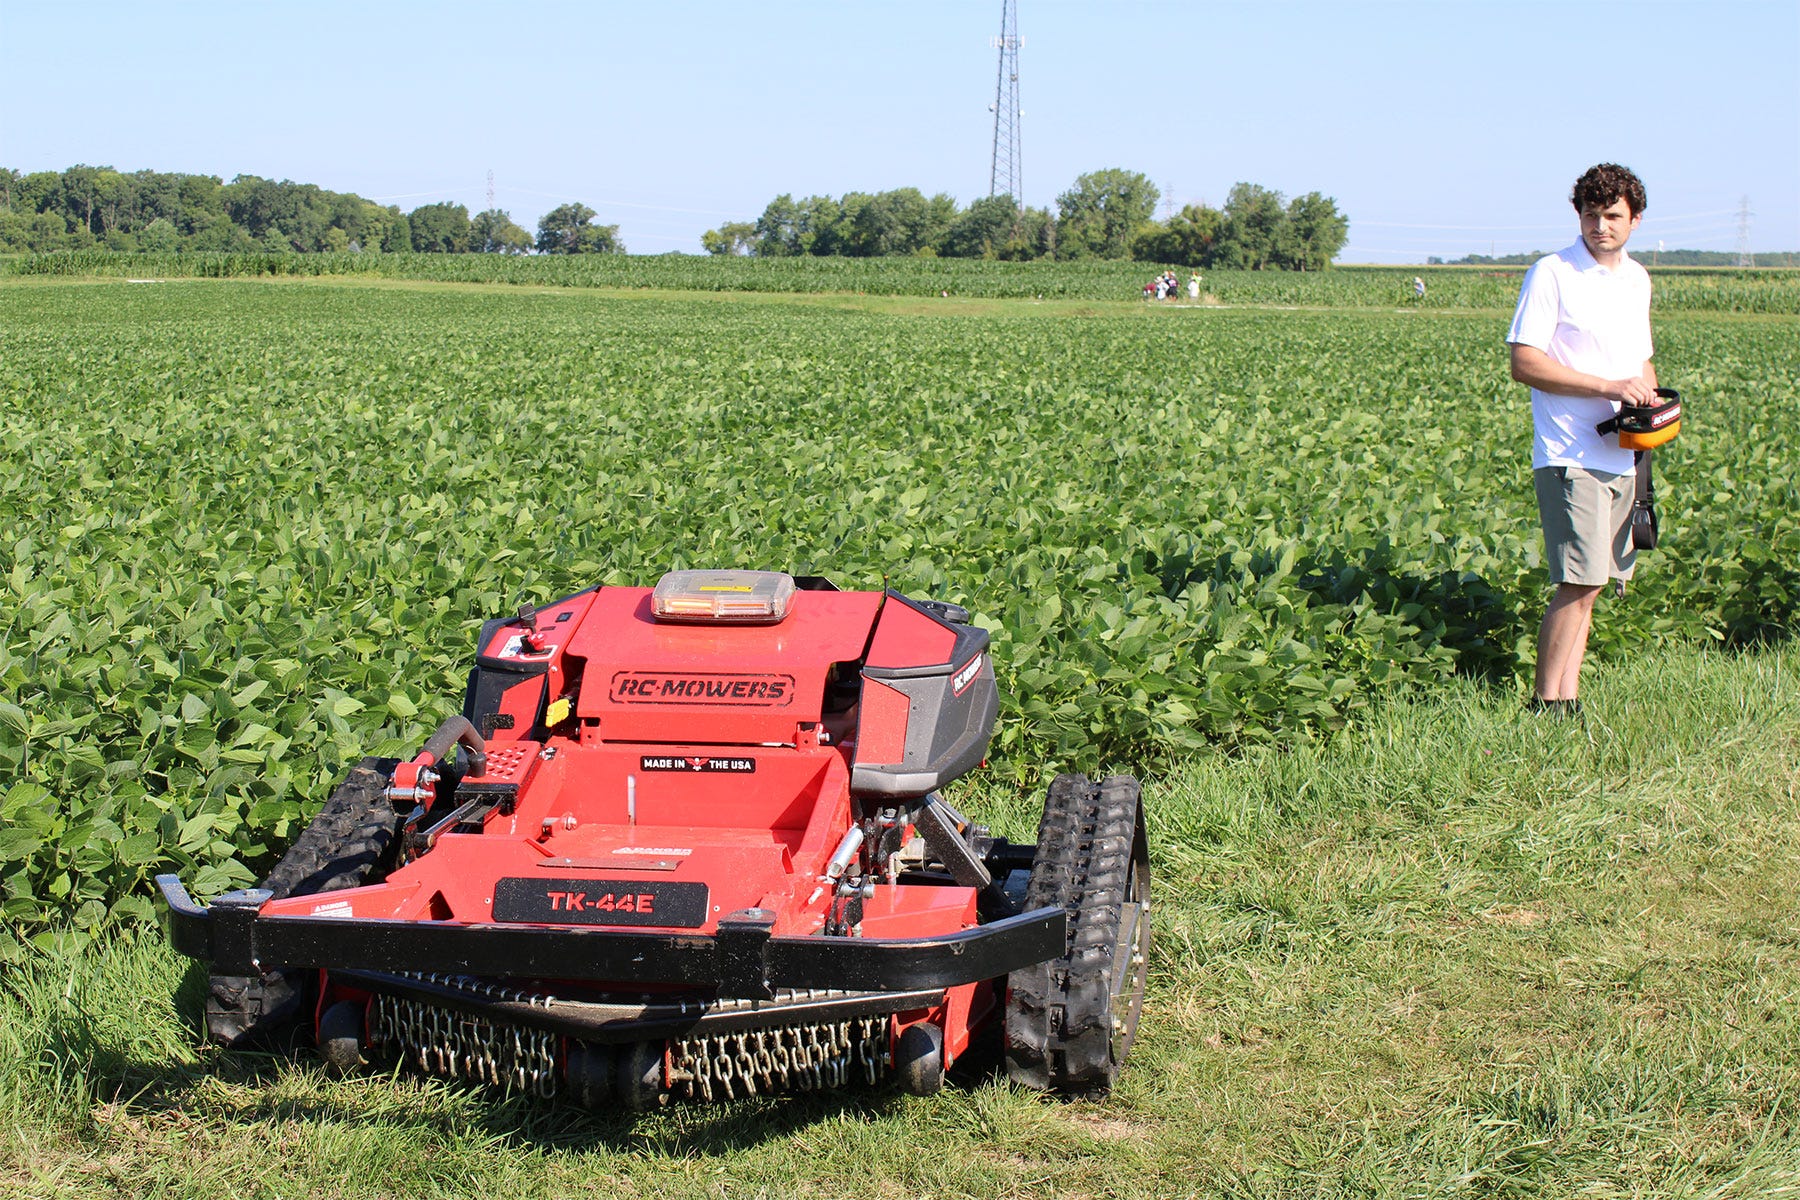 a college student demonstrates a red remote-controlled mower by a soybean field